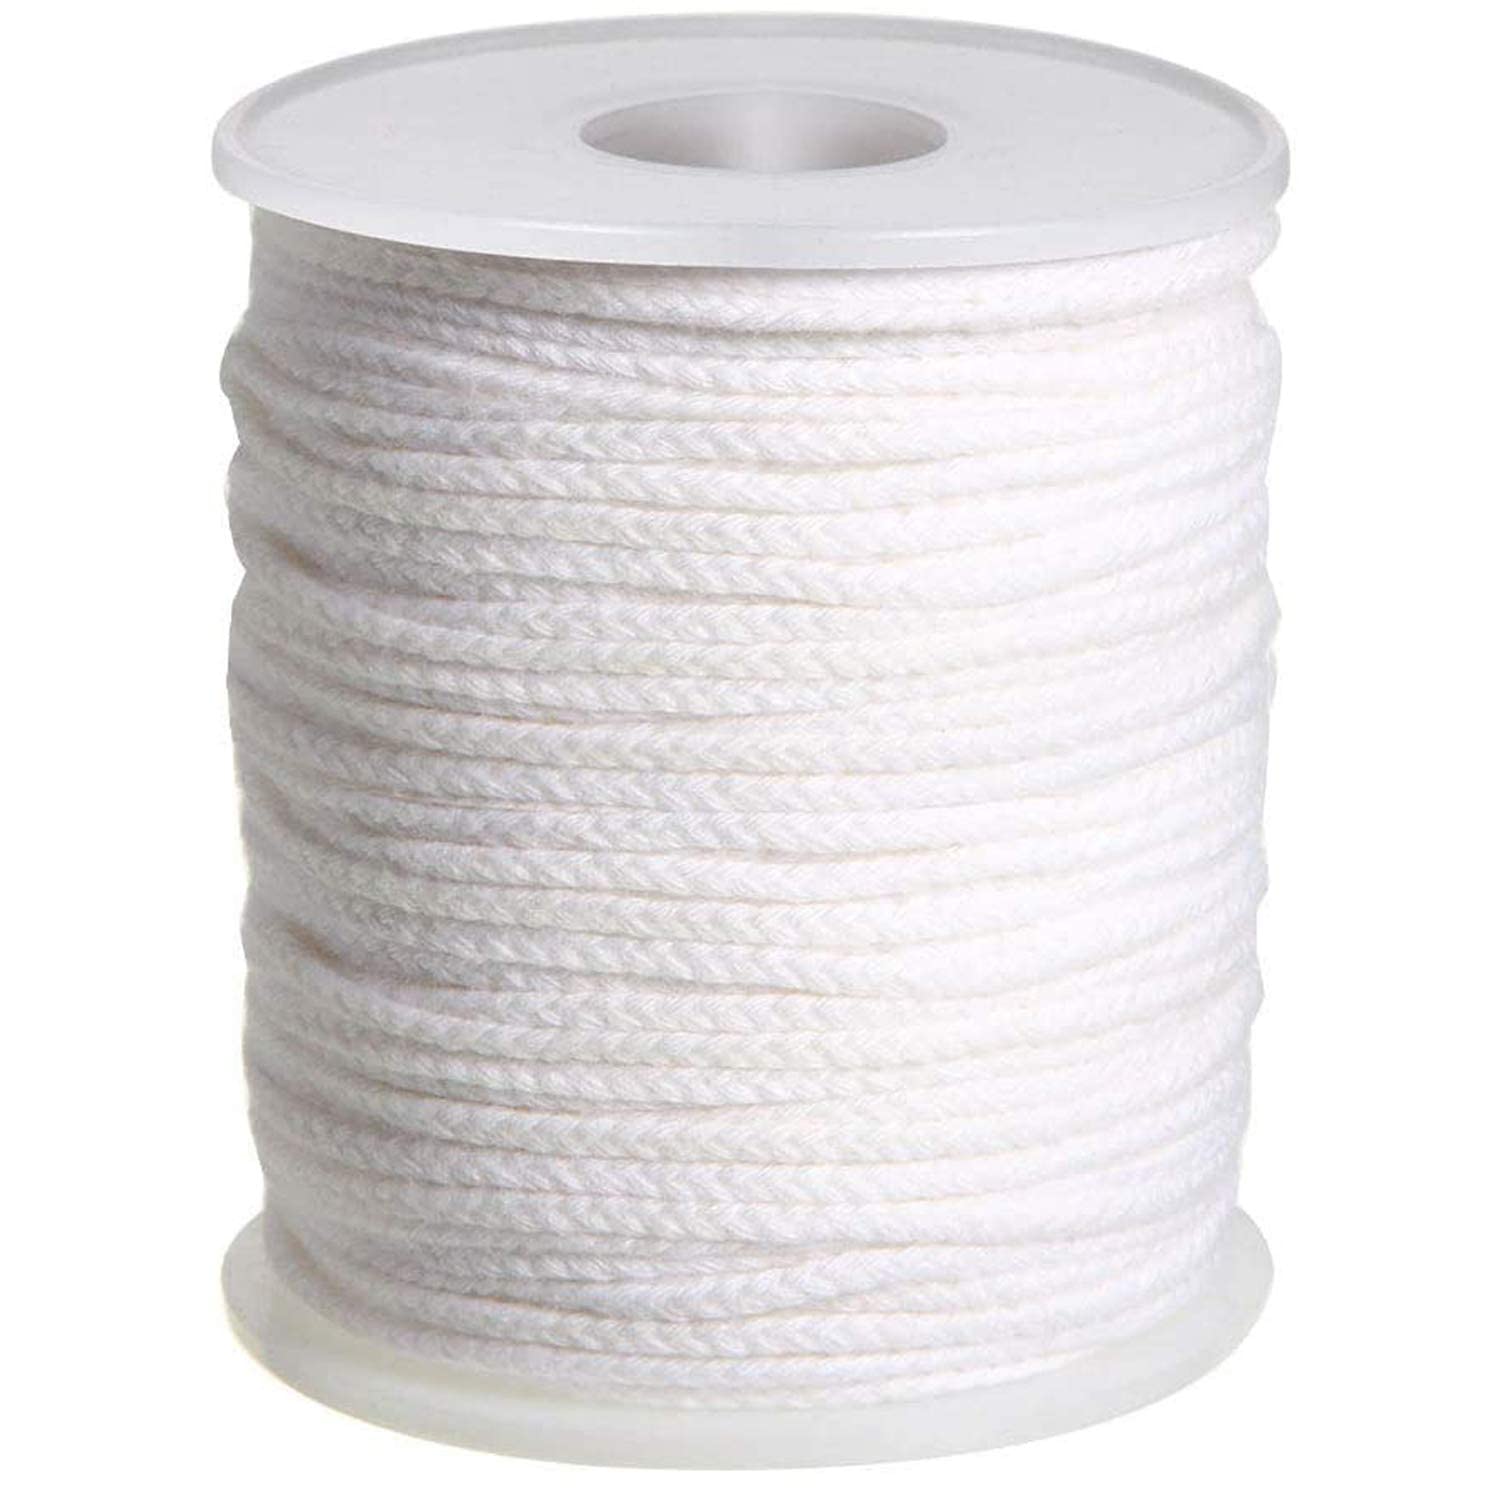 200 Feet Braided Candle Wicks 100% Cotton 24 Ply Wicks for Candle Making,  Replacement Wicks for Candle DIY Candle Wick Only